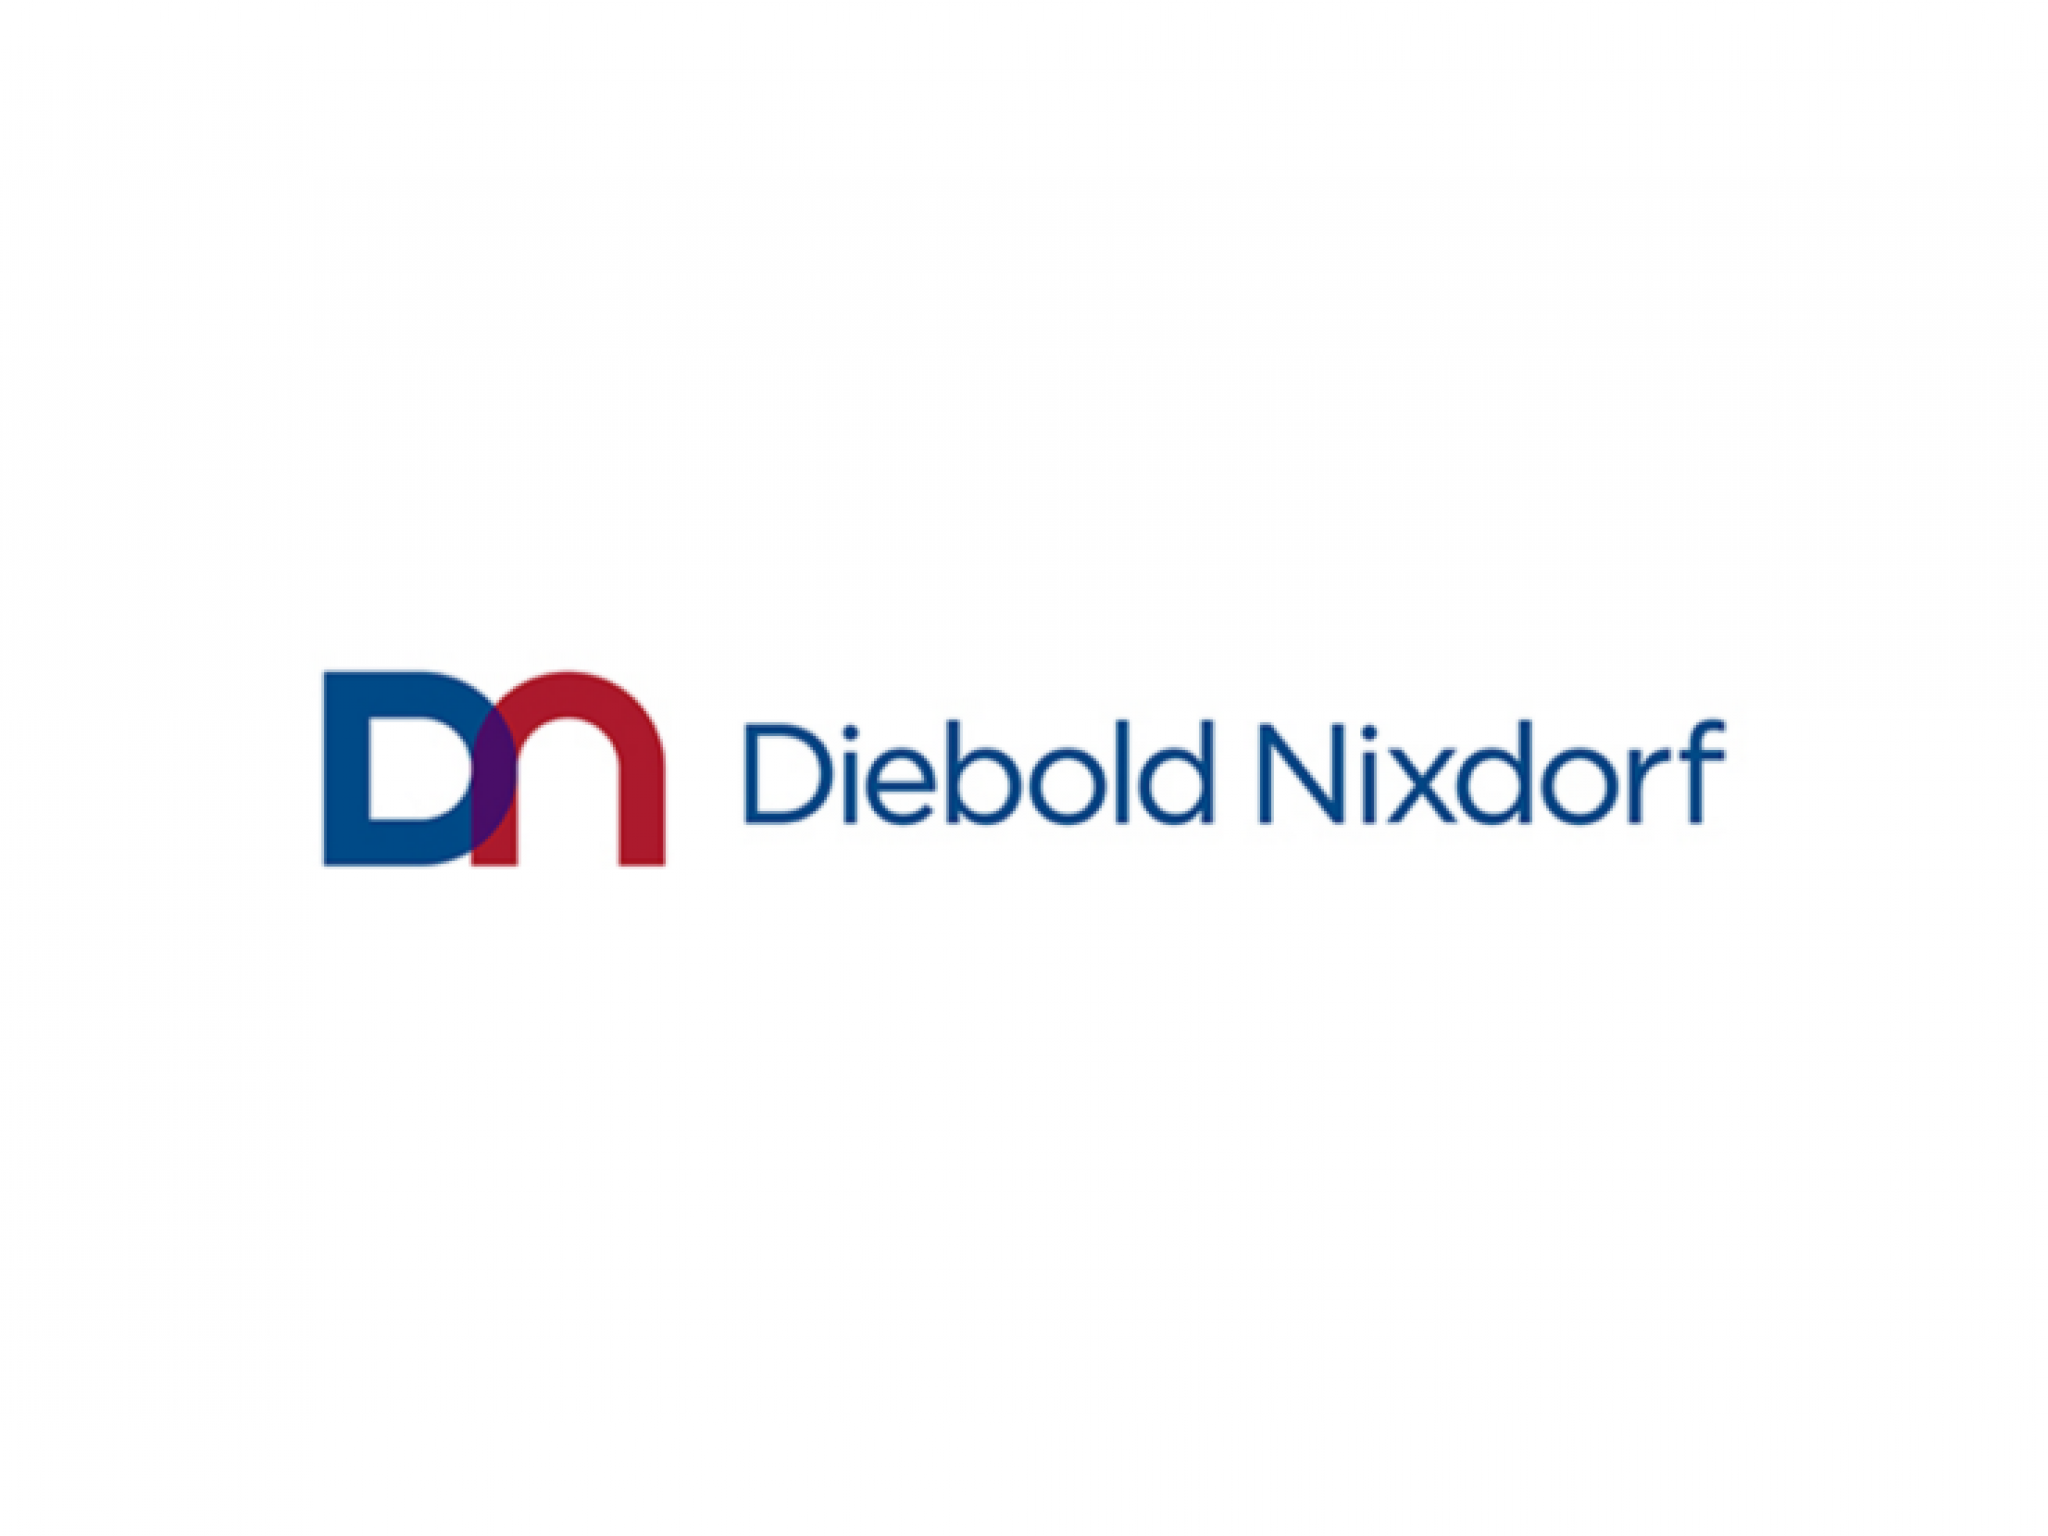  why-diebold-nixdorf-shares-are-rising-today 